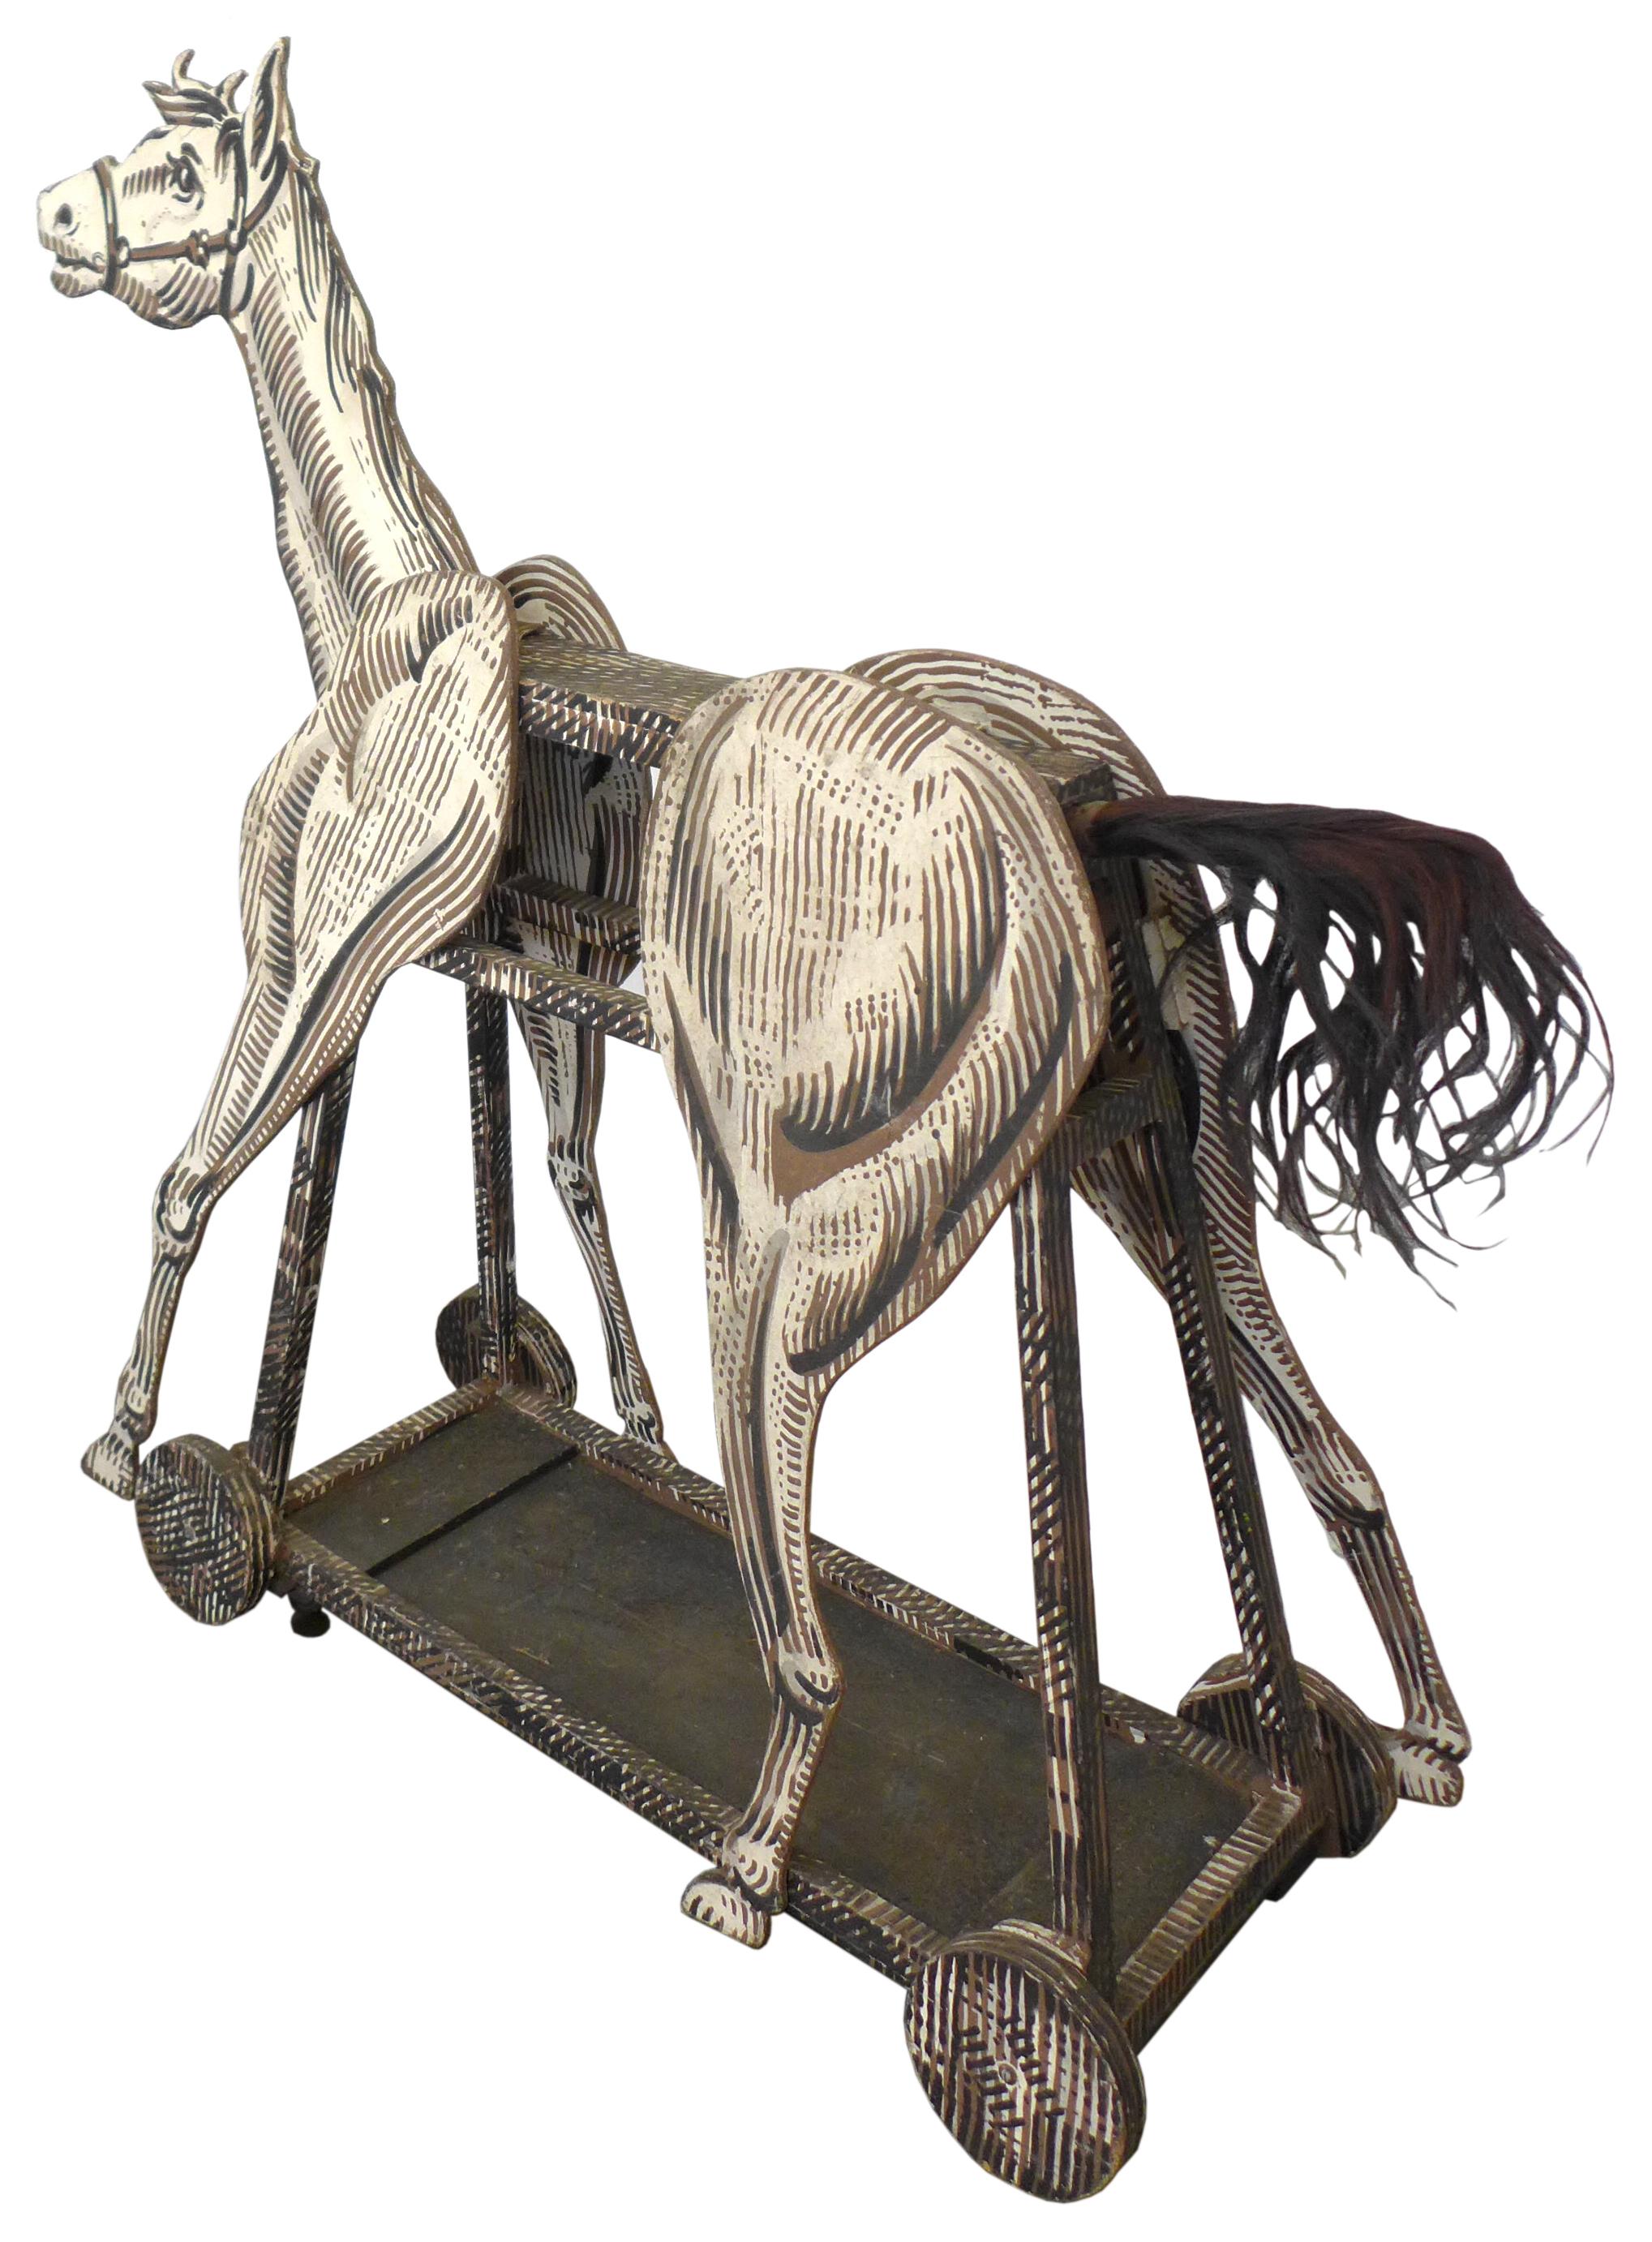 Hand-Crafted Hand Painted Wood Folk Art Horse Sculpture For Sale